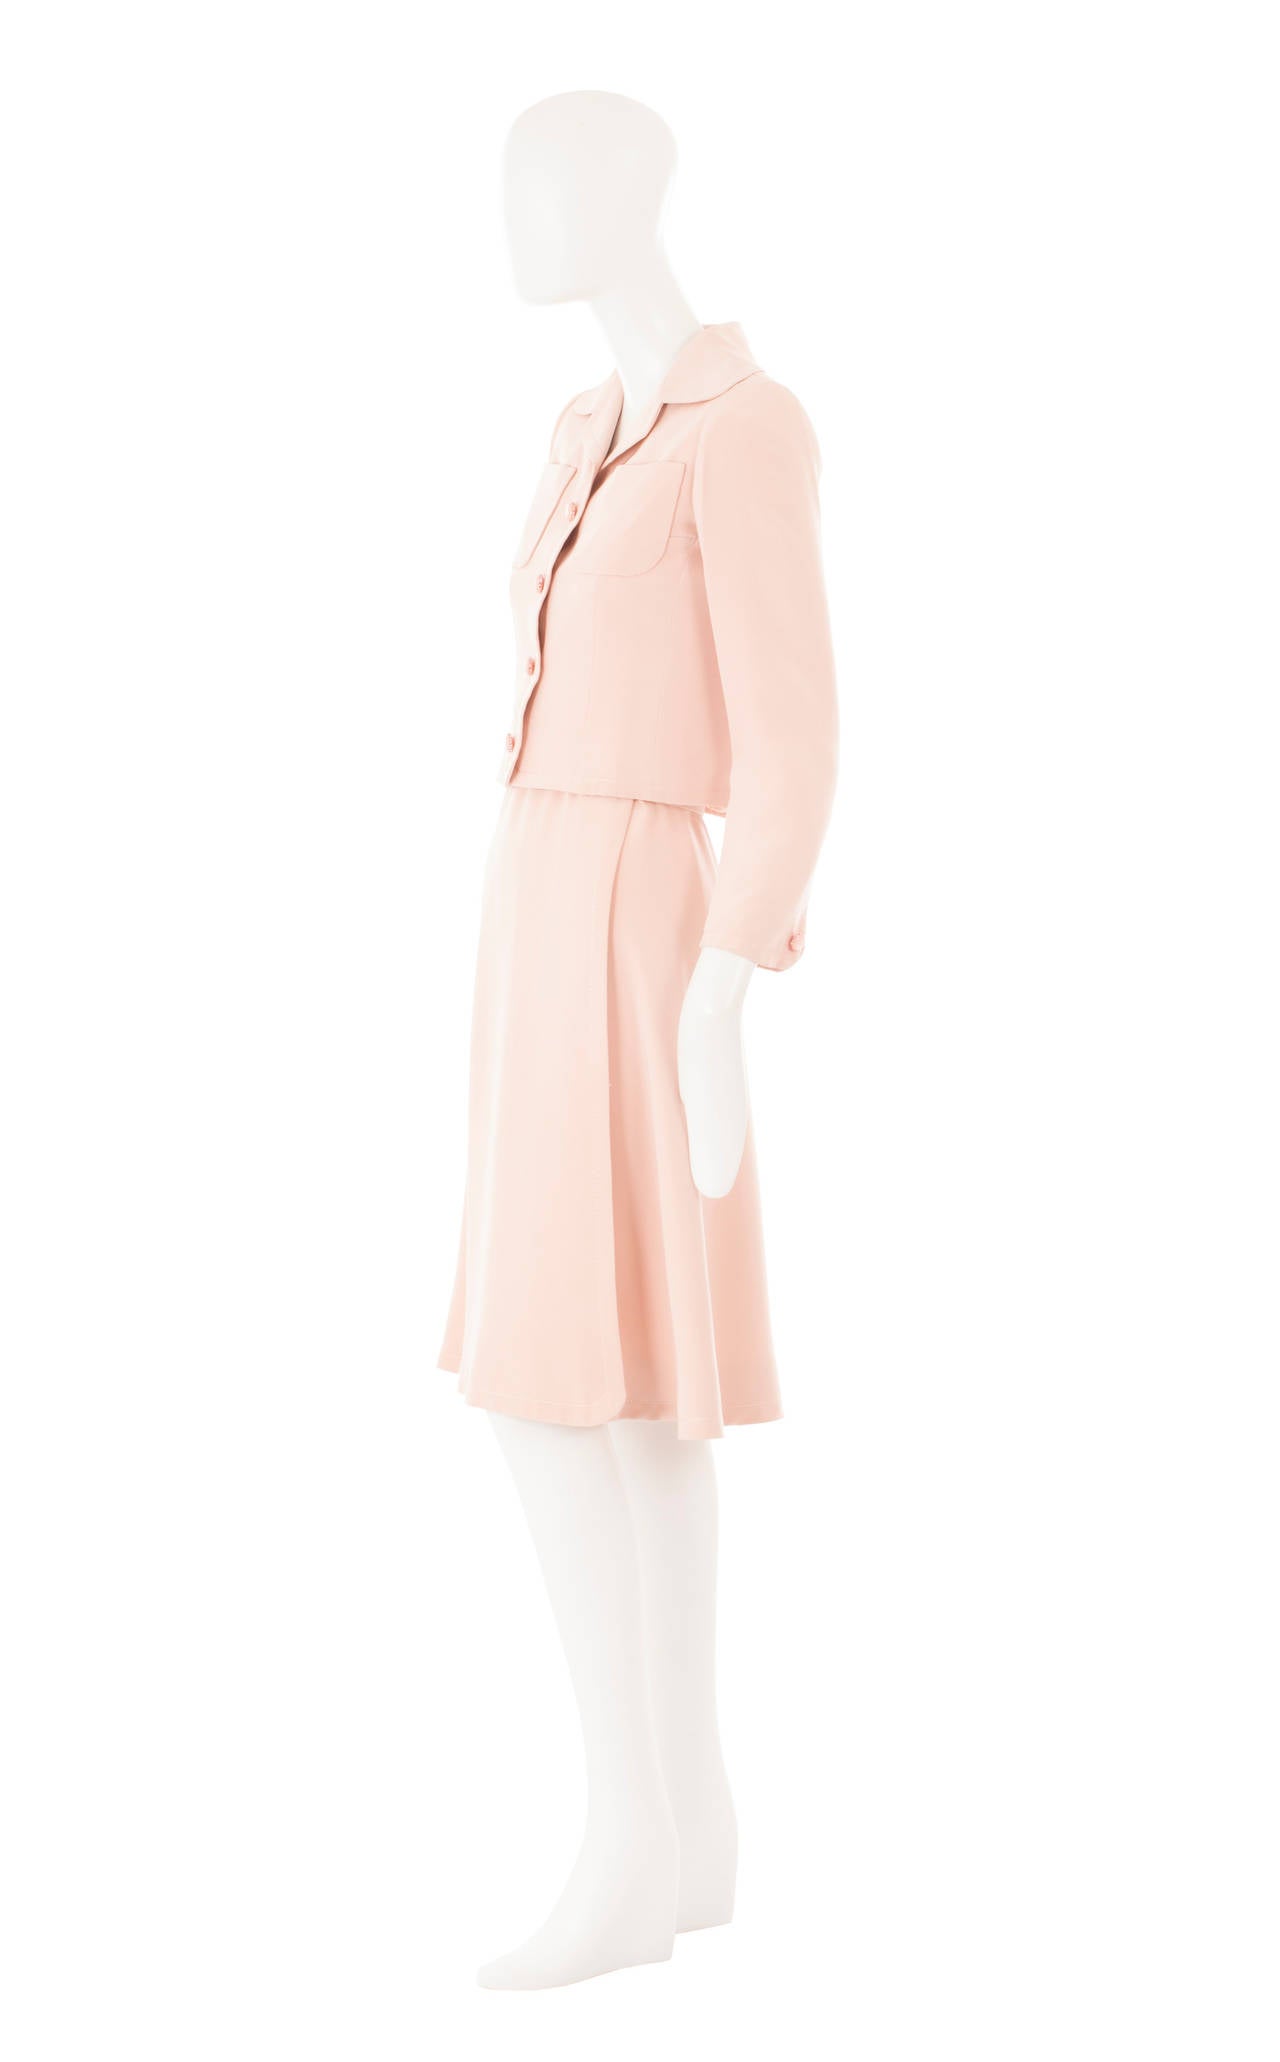 A gorgeous piece of haute couture, this Guy Laroche dress suit constructed in pale pink silk, is perfect for daytime events. The sleeveless dress has an extremely flattering cut, skimming the body and flaring into a softly pleated skirt. The jacket